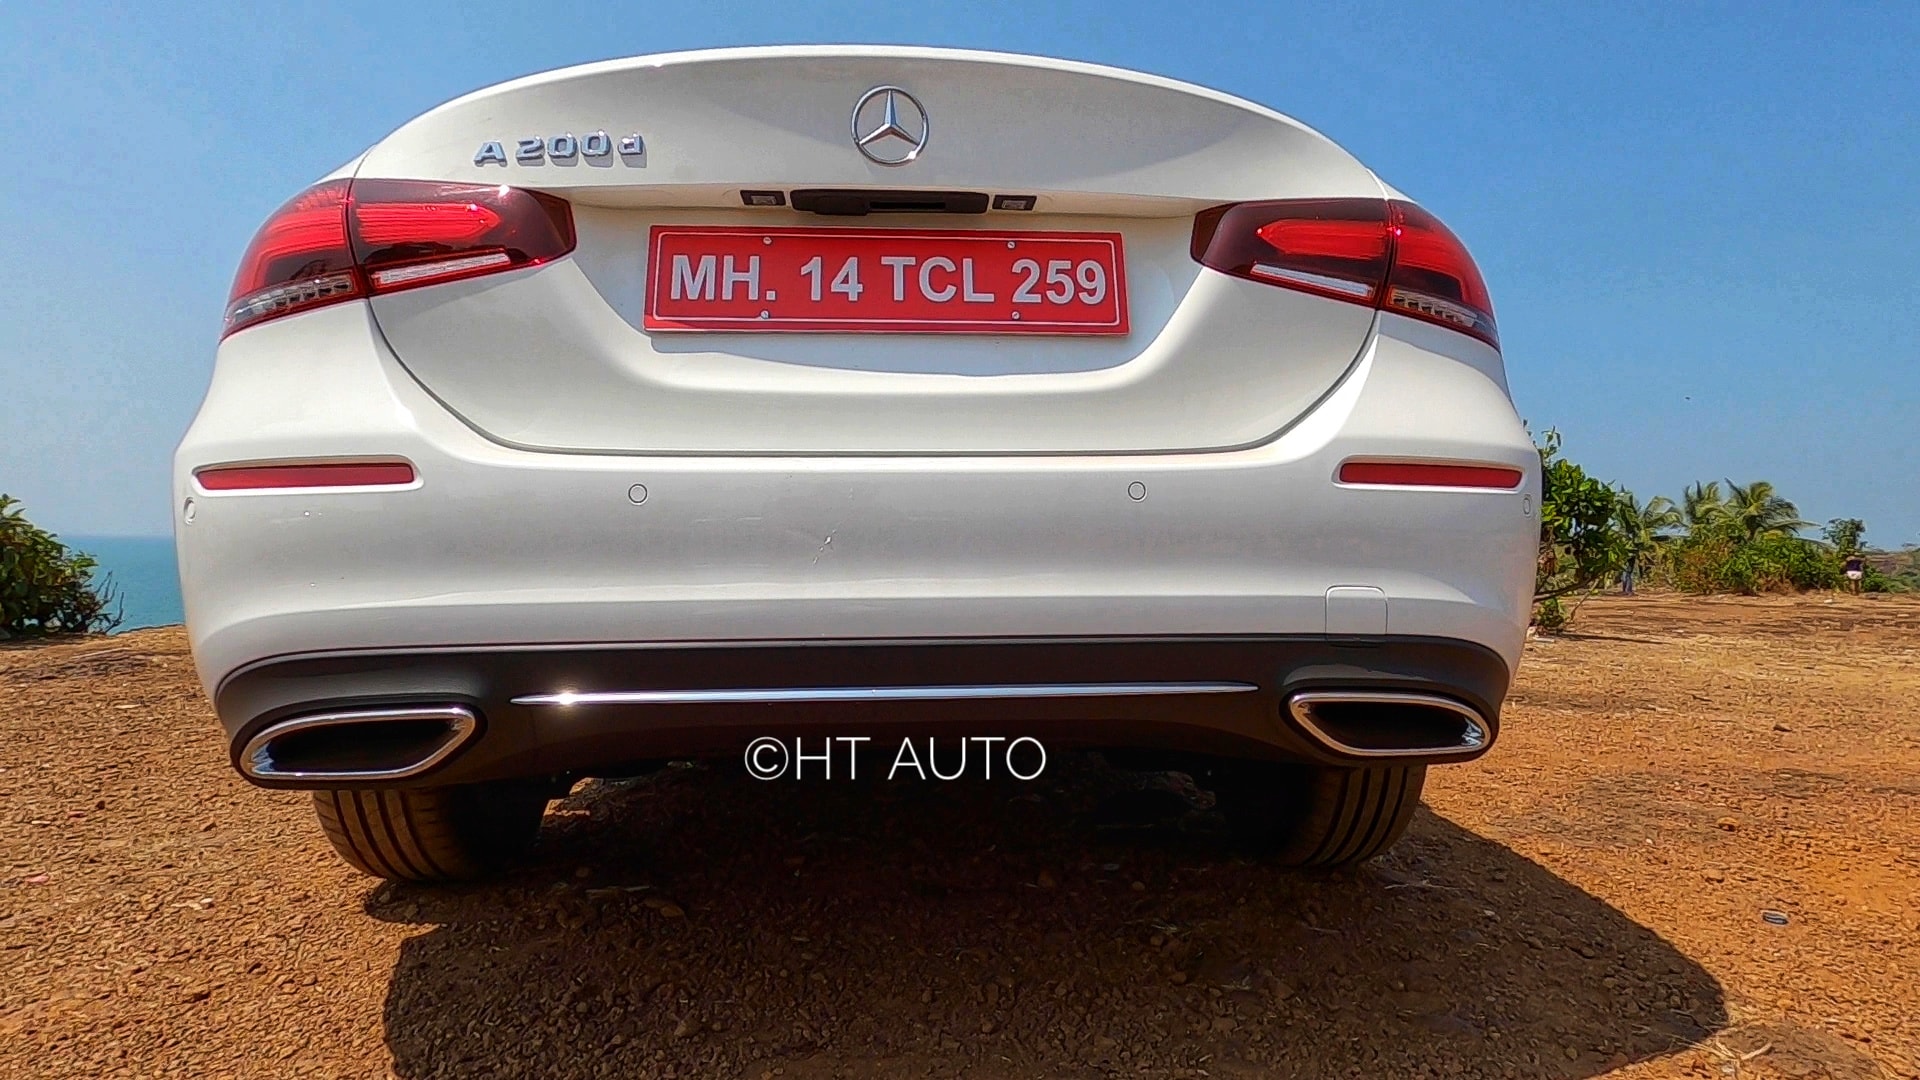 The exhaust vents in chrome are the only sporty edition to the visual profile of the A-Class Limousine from the rear. (HT Auto/Sabyasachi Dasgupta)